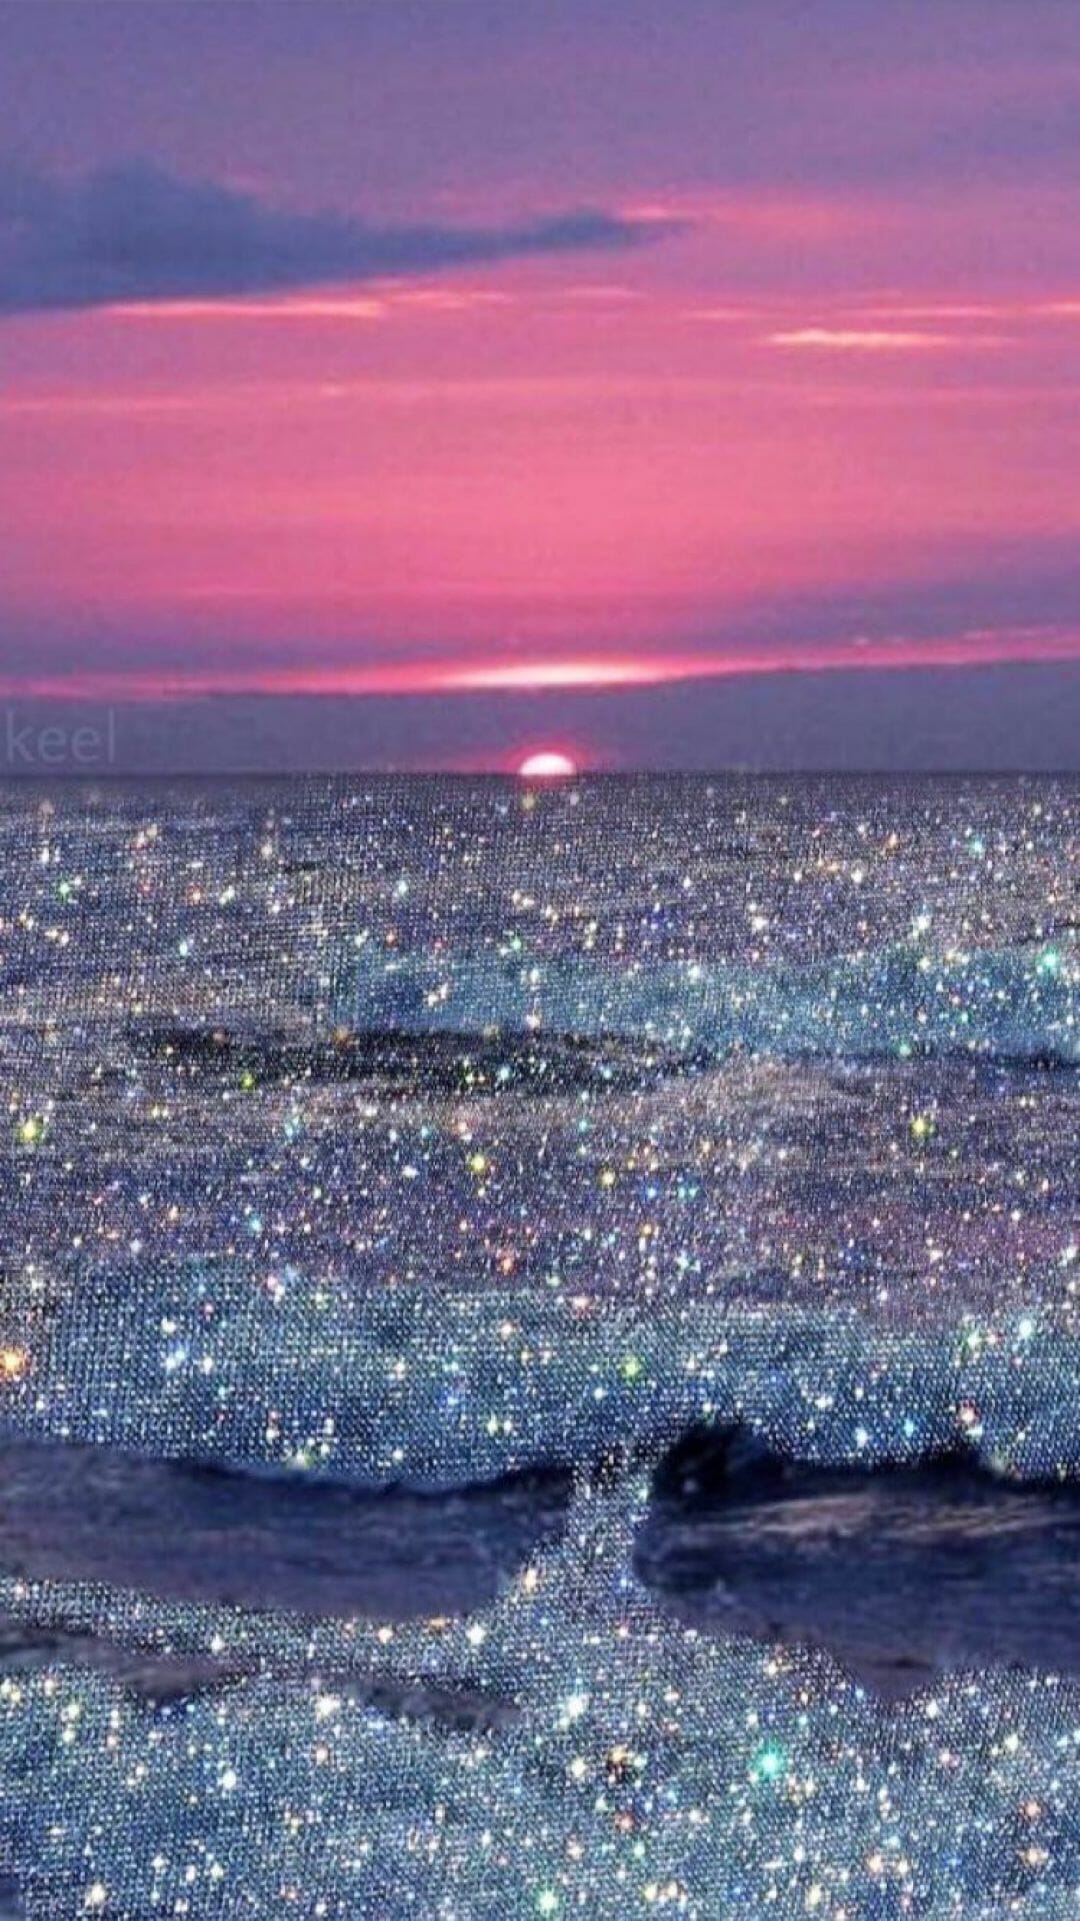 A beautiful sunset over the ocean with a blanket of stars. - Bling, glitter